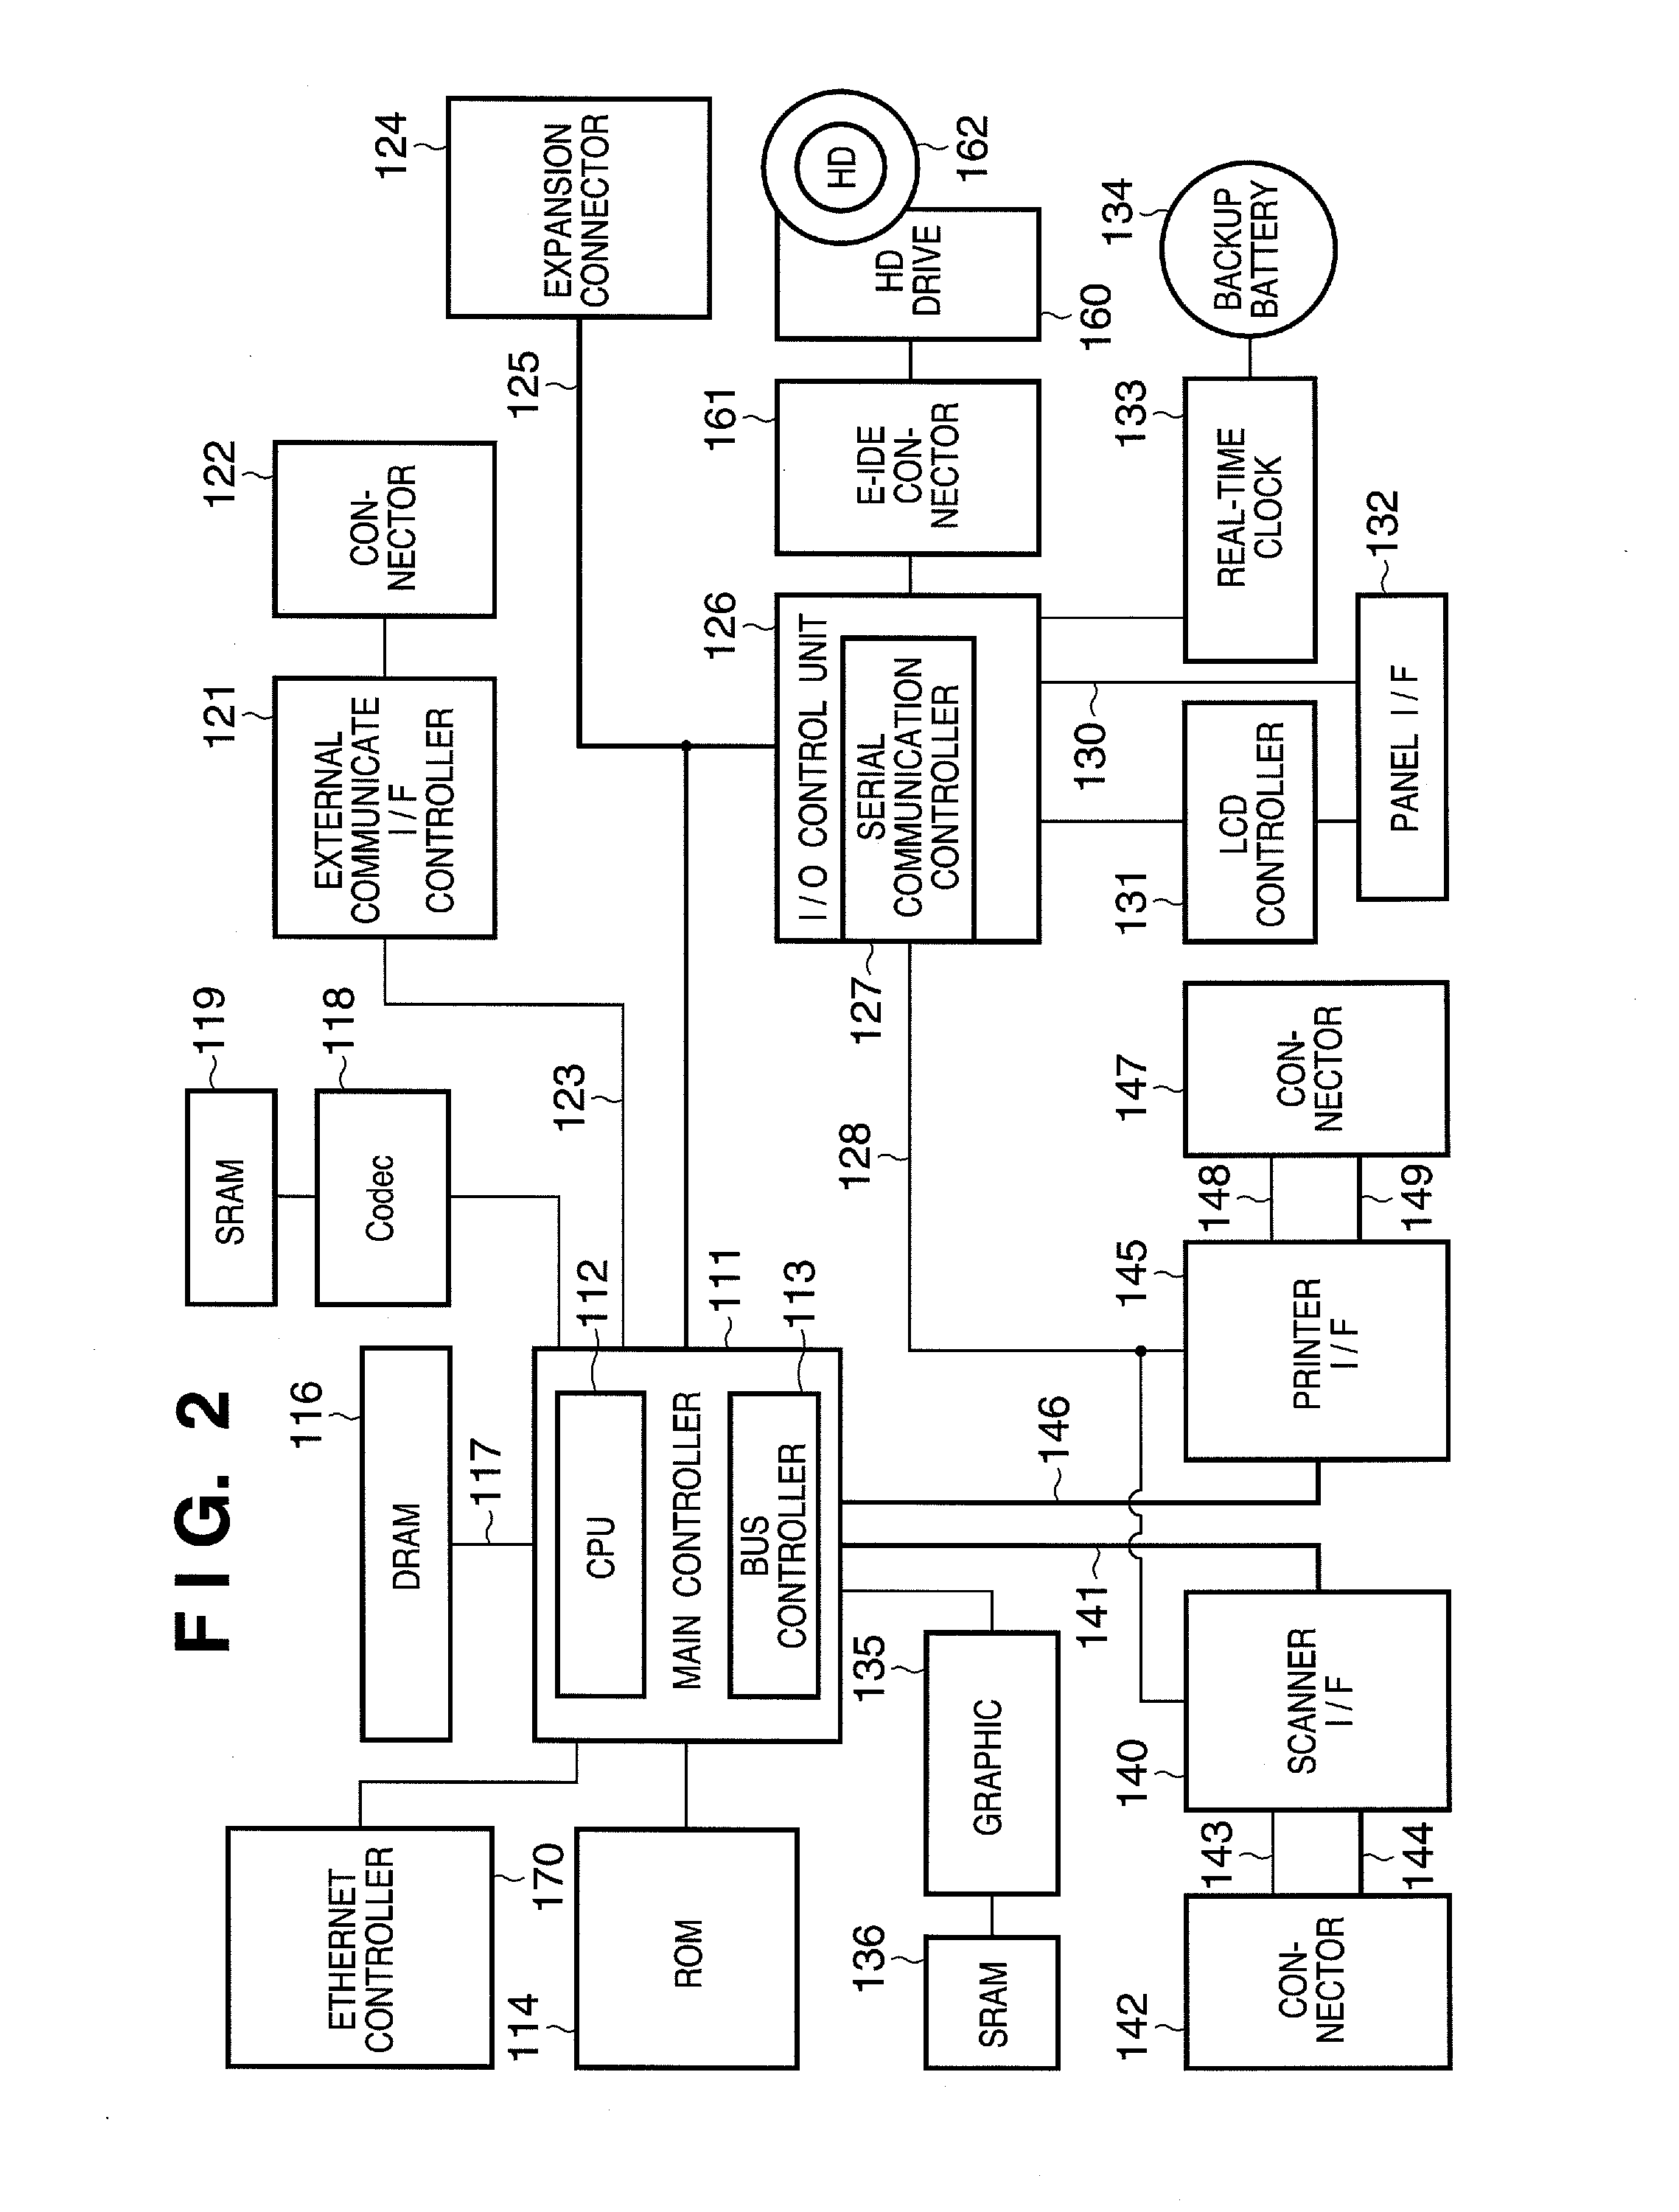 Data transmission apparatus, control method therefor, and image input/output apparatus